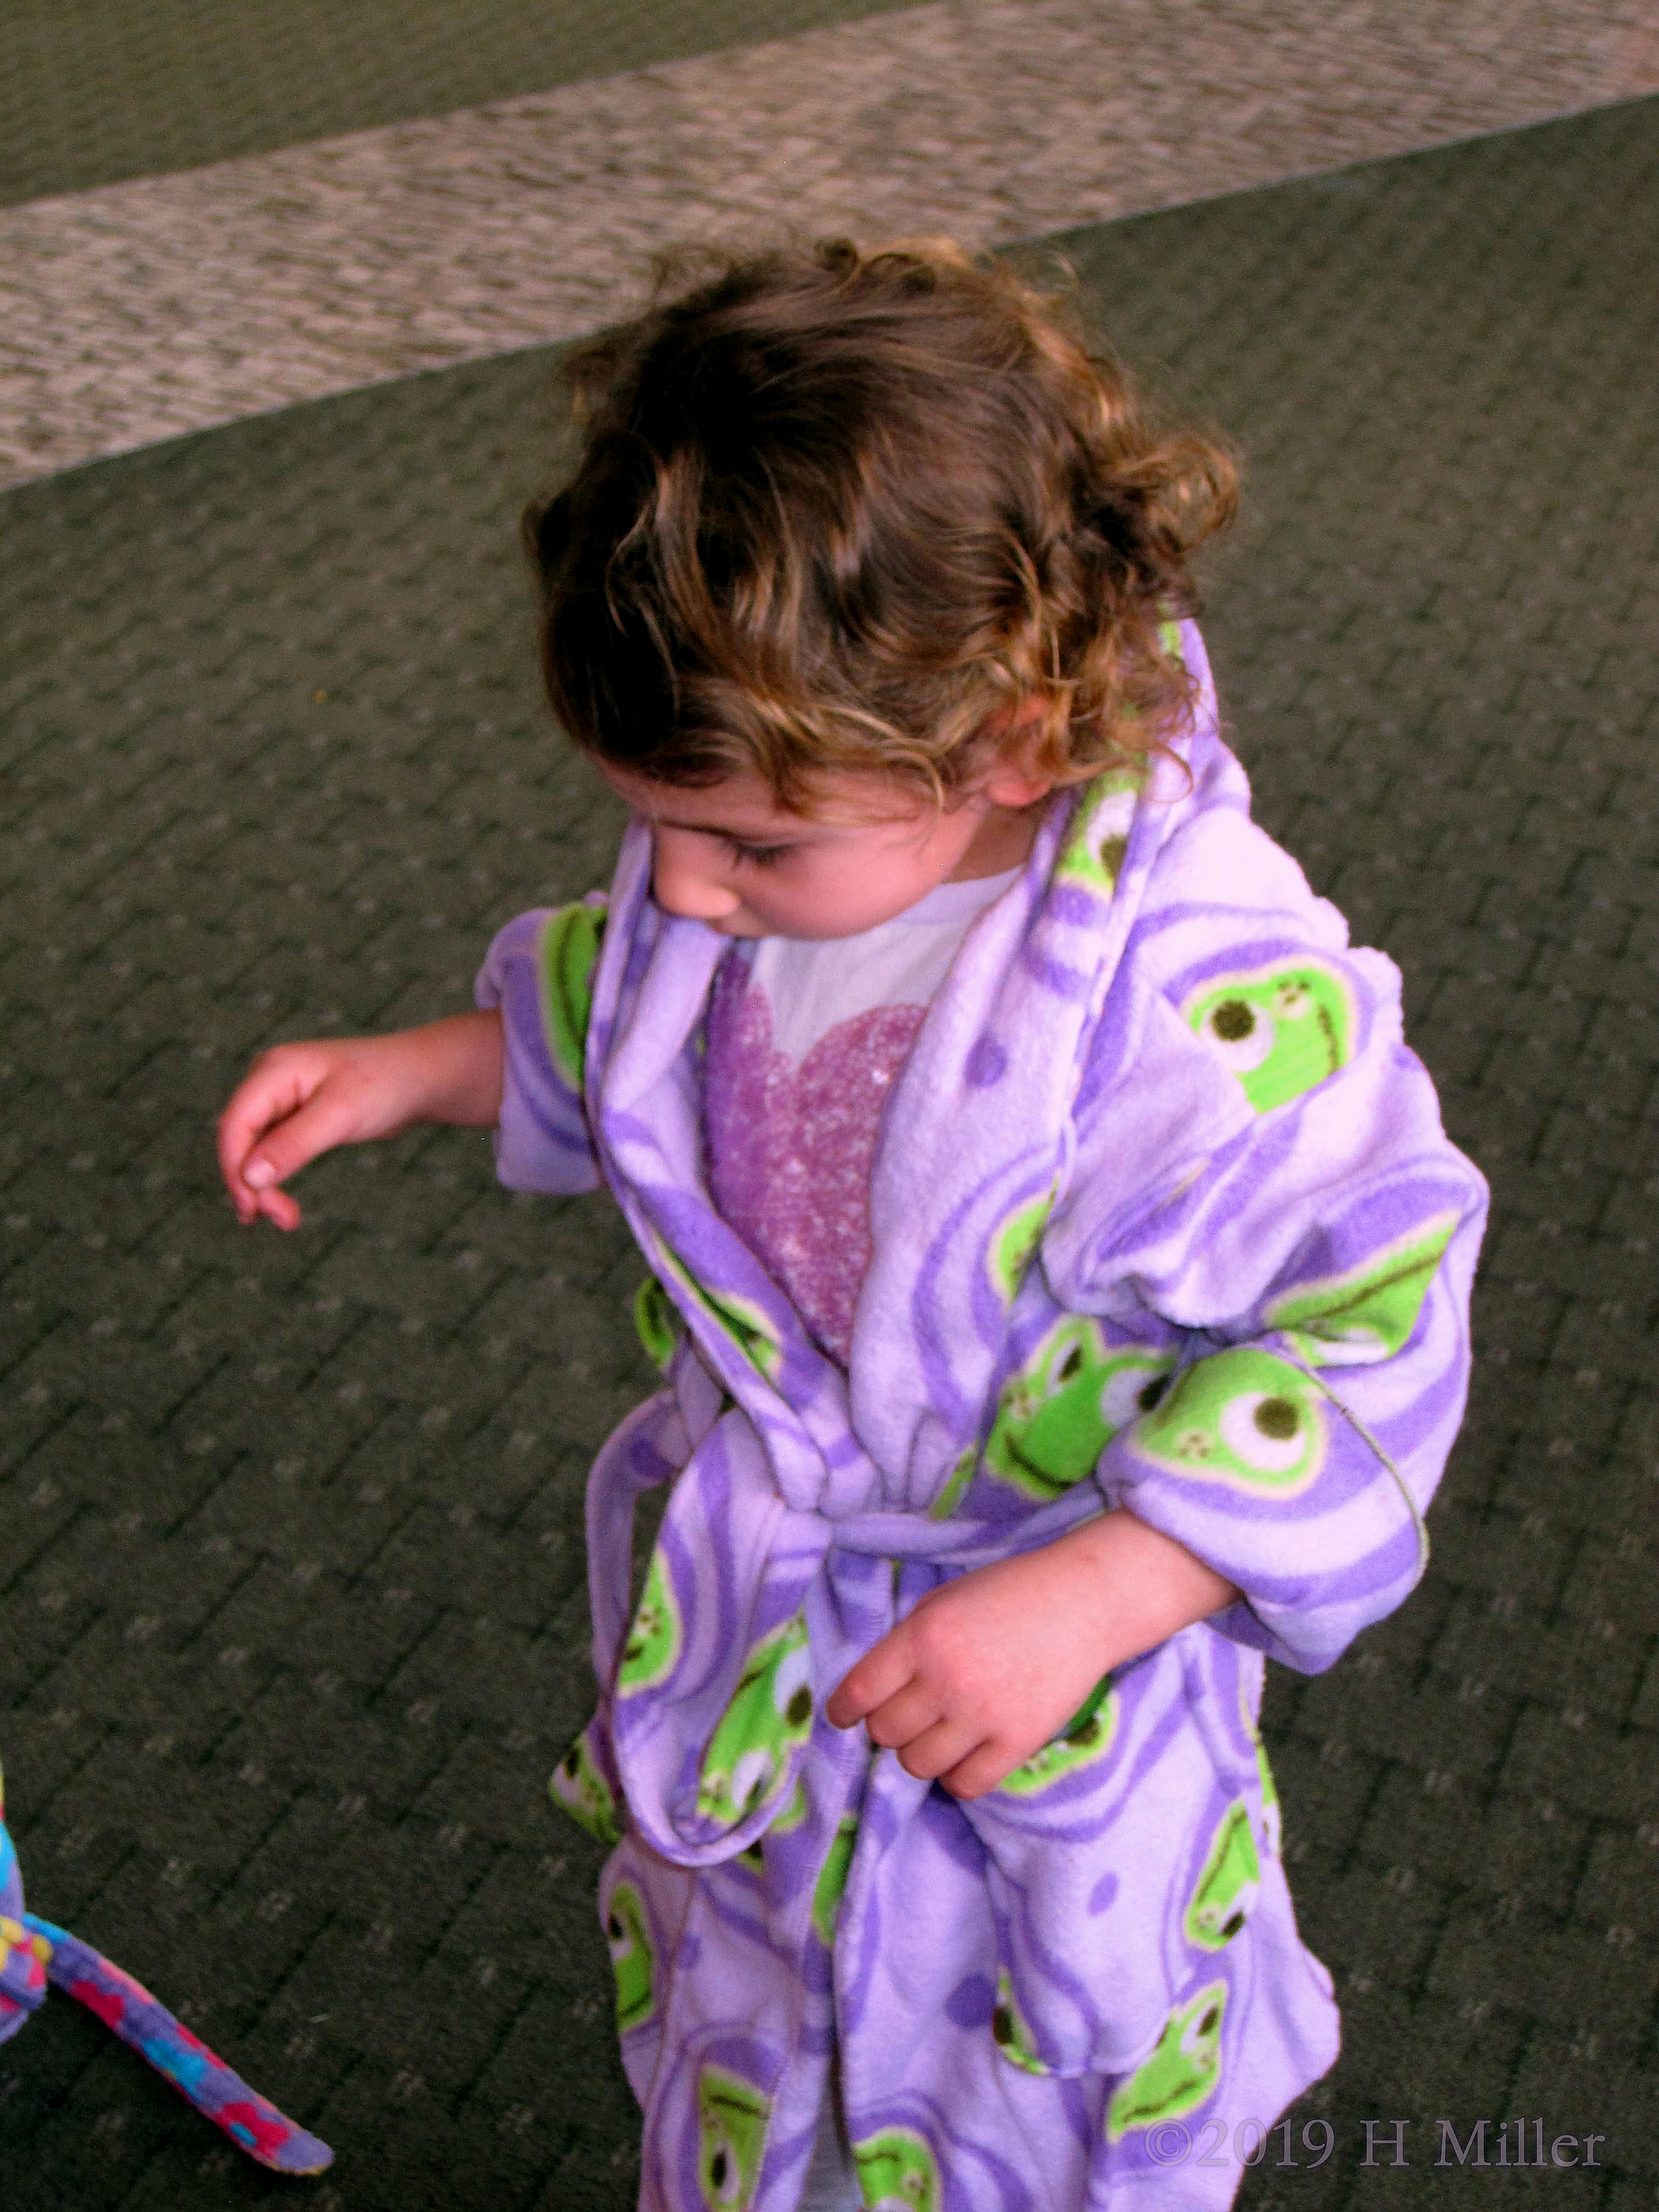 Another Party Guest Gets Ready For Fun In A Frog Spa Robe!